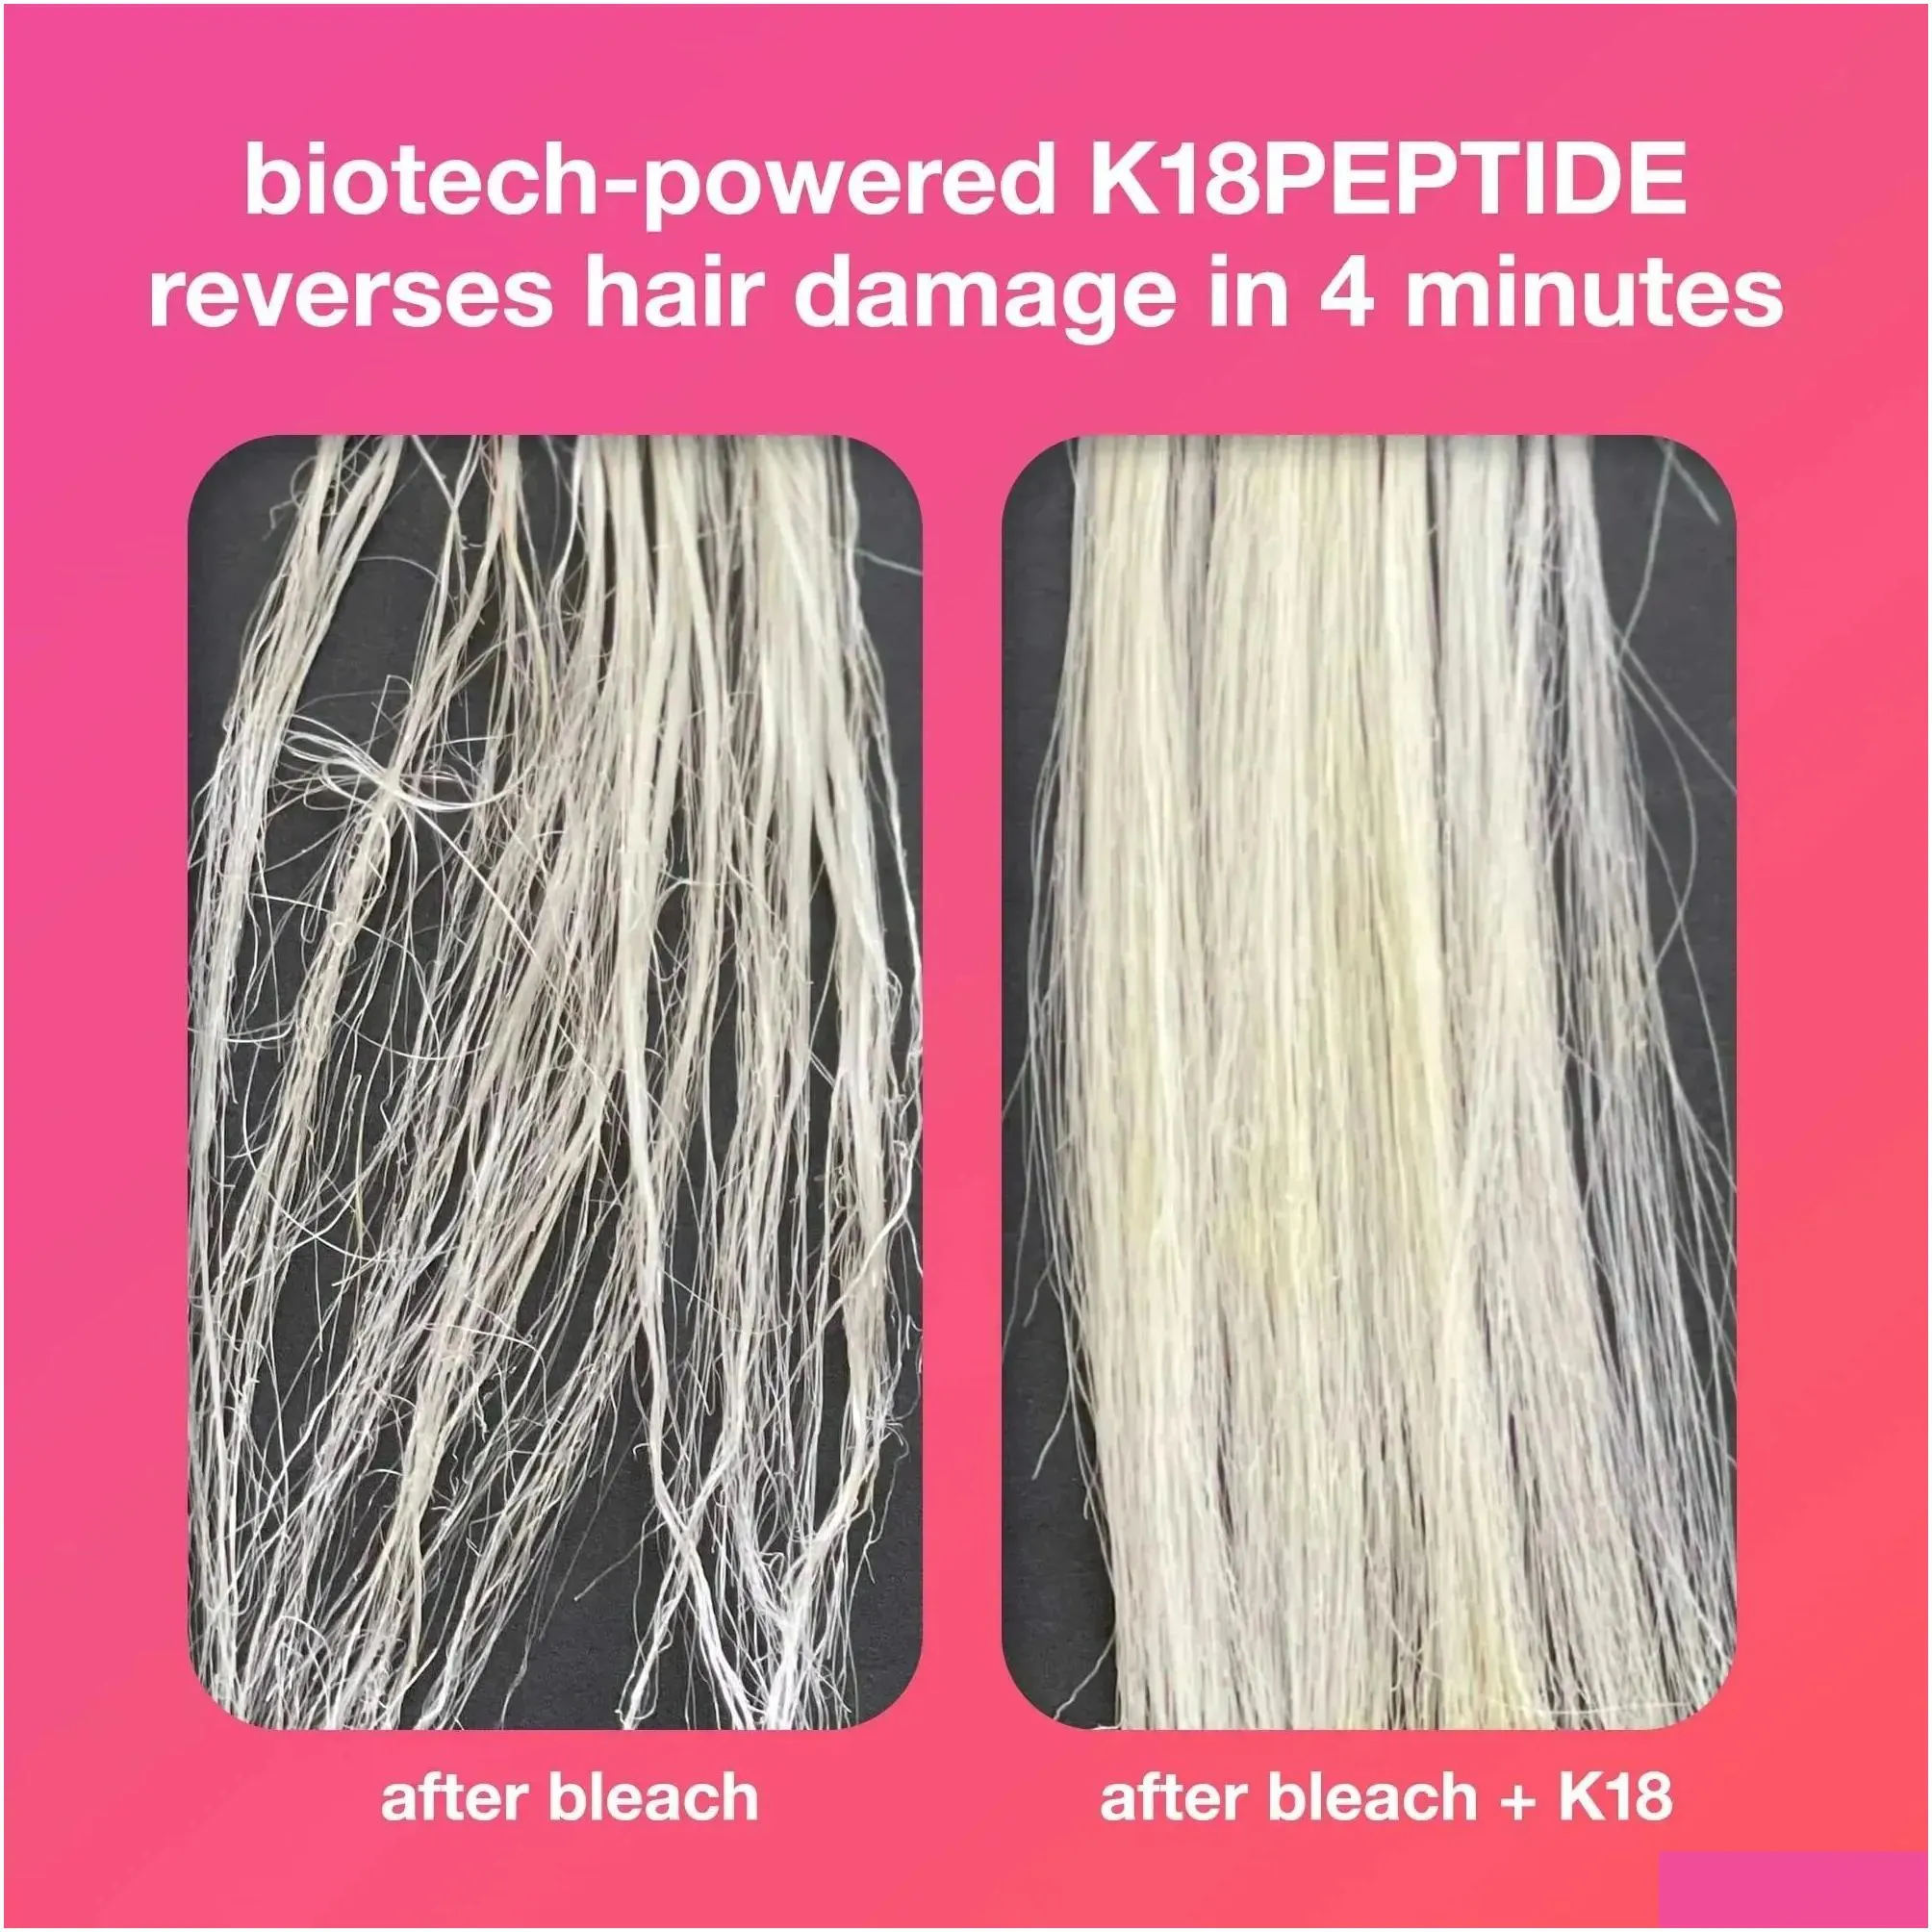 Shampoo&Conditioner K18 Leave-In Molecar Repair Hair Mask To Damage From Bleach 50Ml Drop Delivery Hair Products Hair Care Styling Too Dh3K8